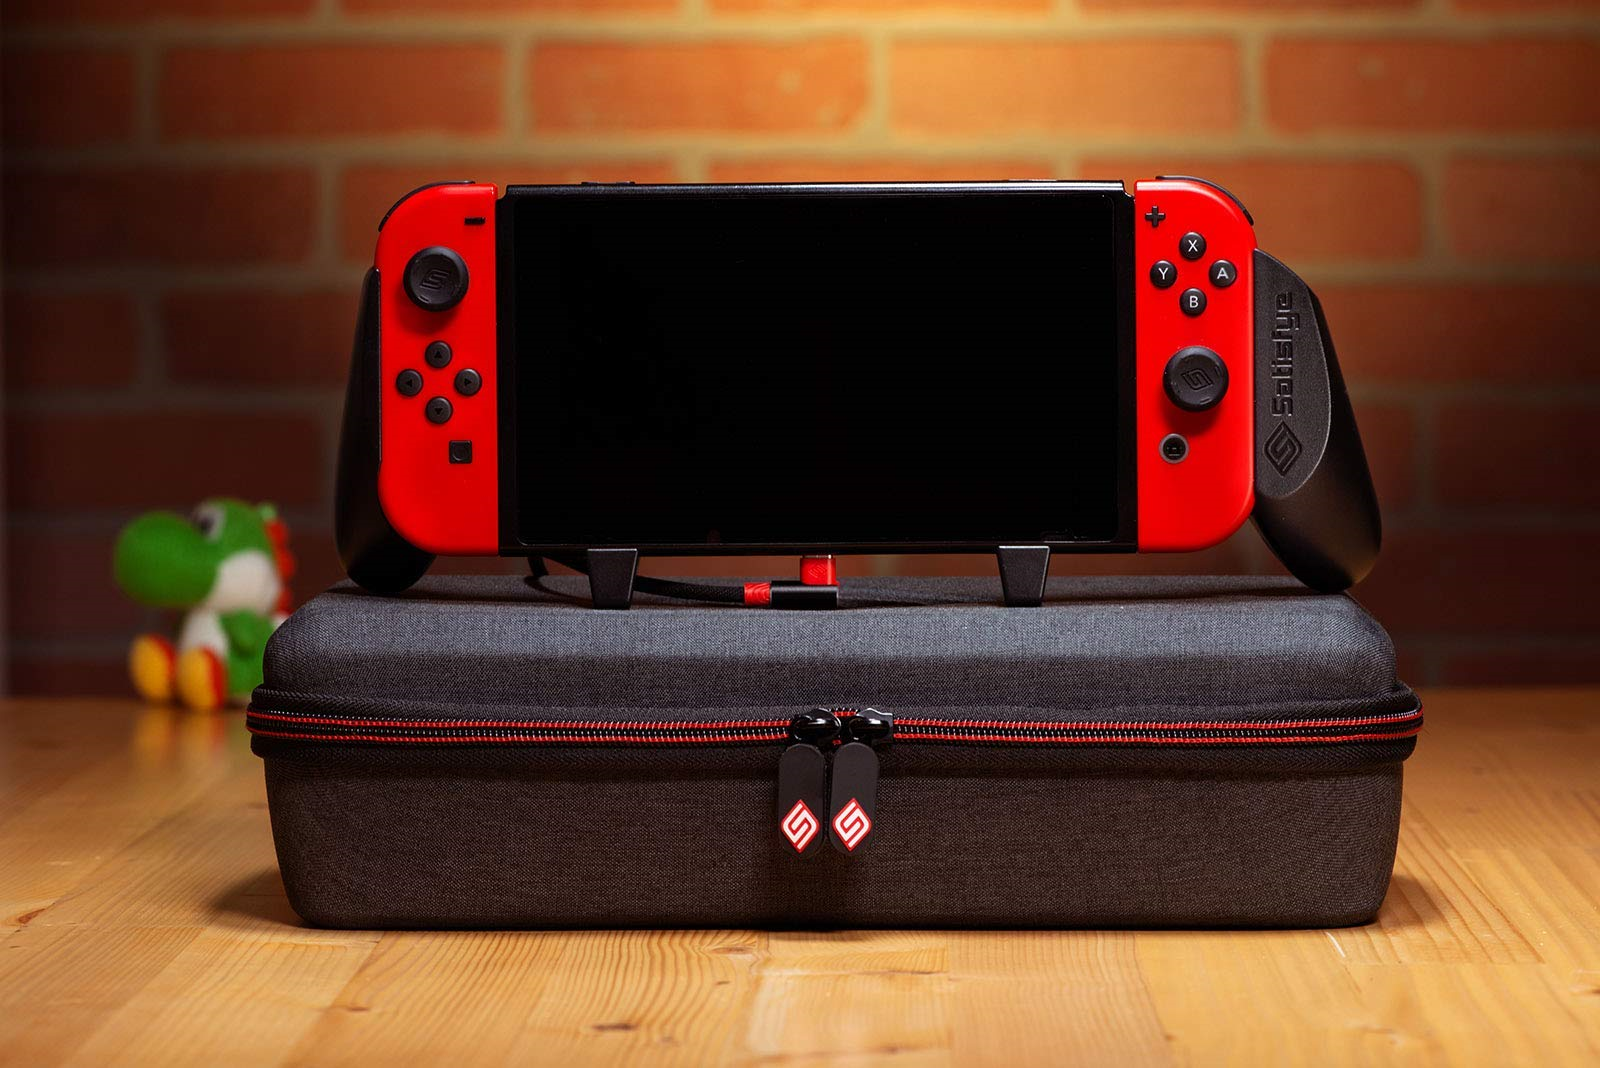 The Satisfye gaming grip and case, the ultimate switch accessories.